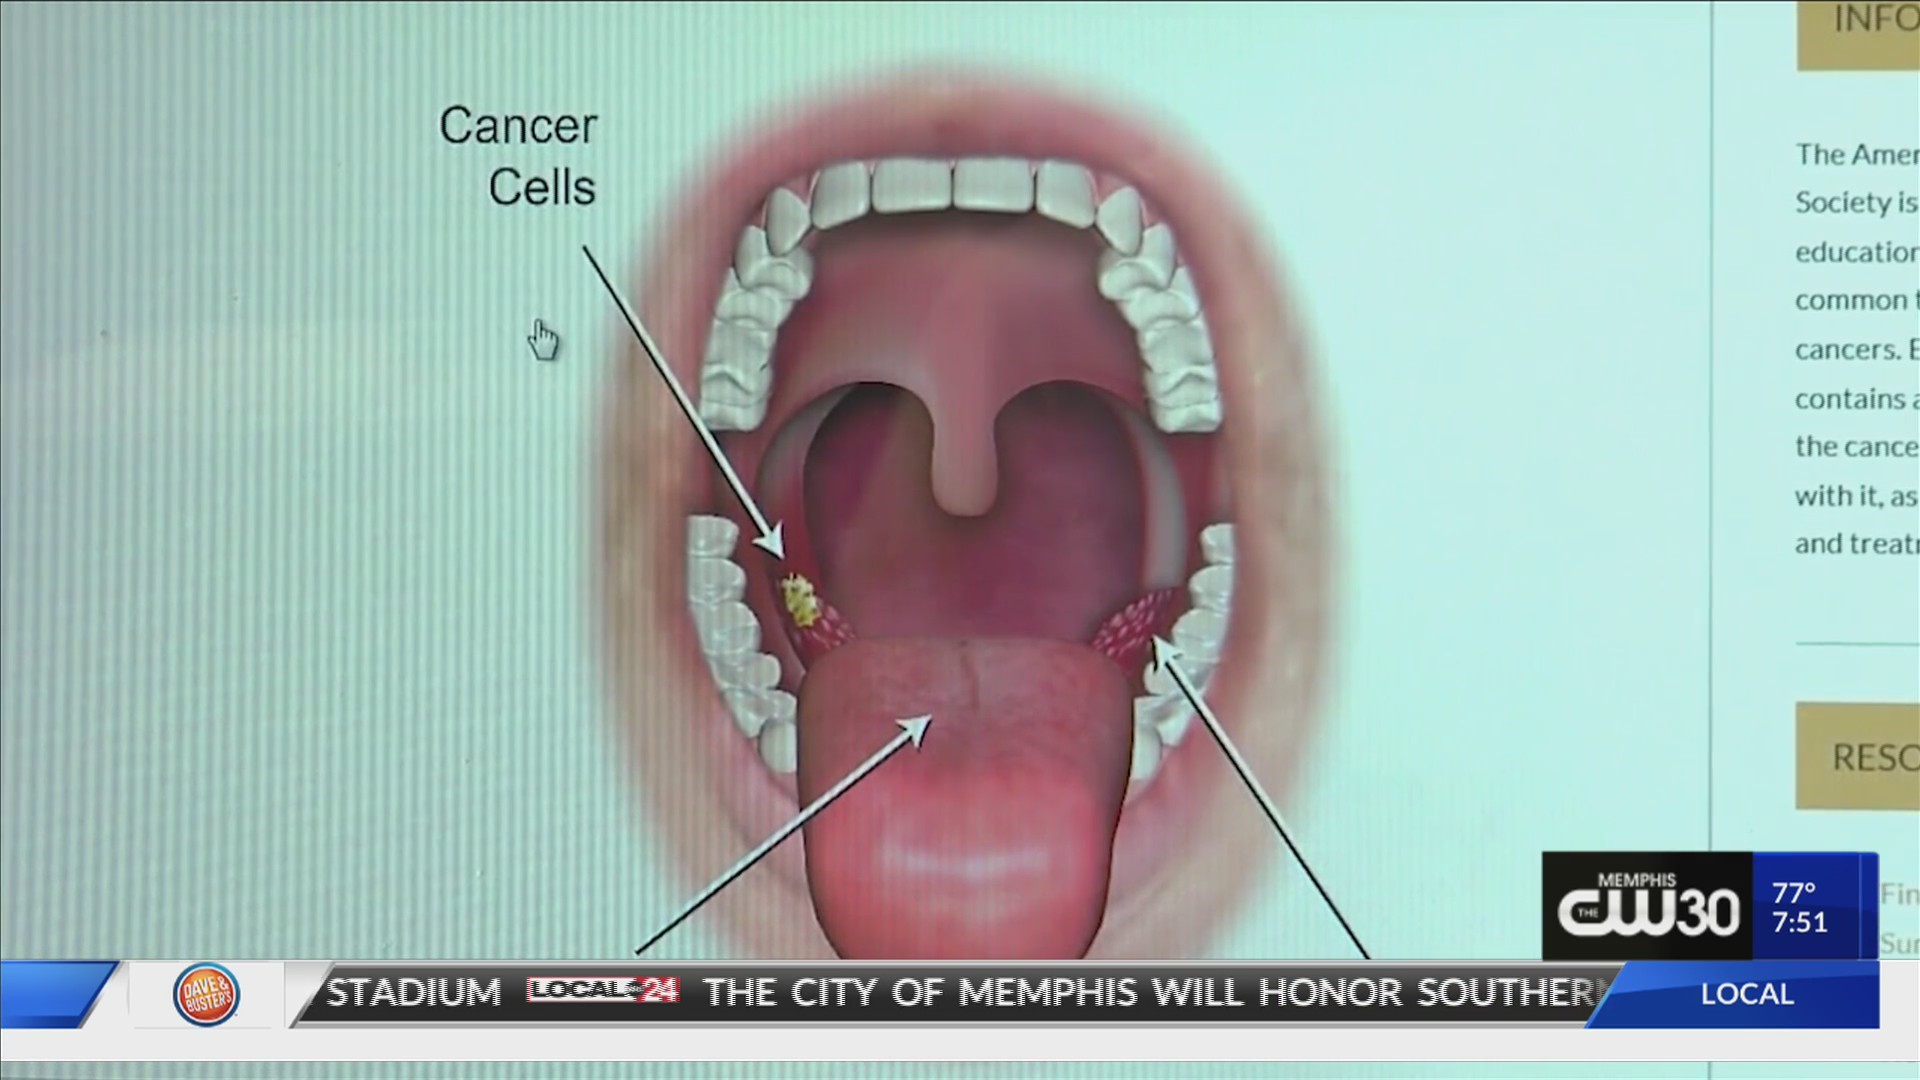 Hpv throat tumor, Human papillomavirus mouth and throat cancer - Hpv neck cancer symptoms